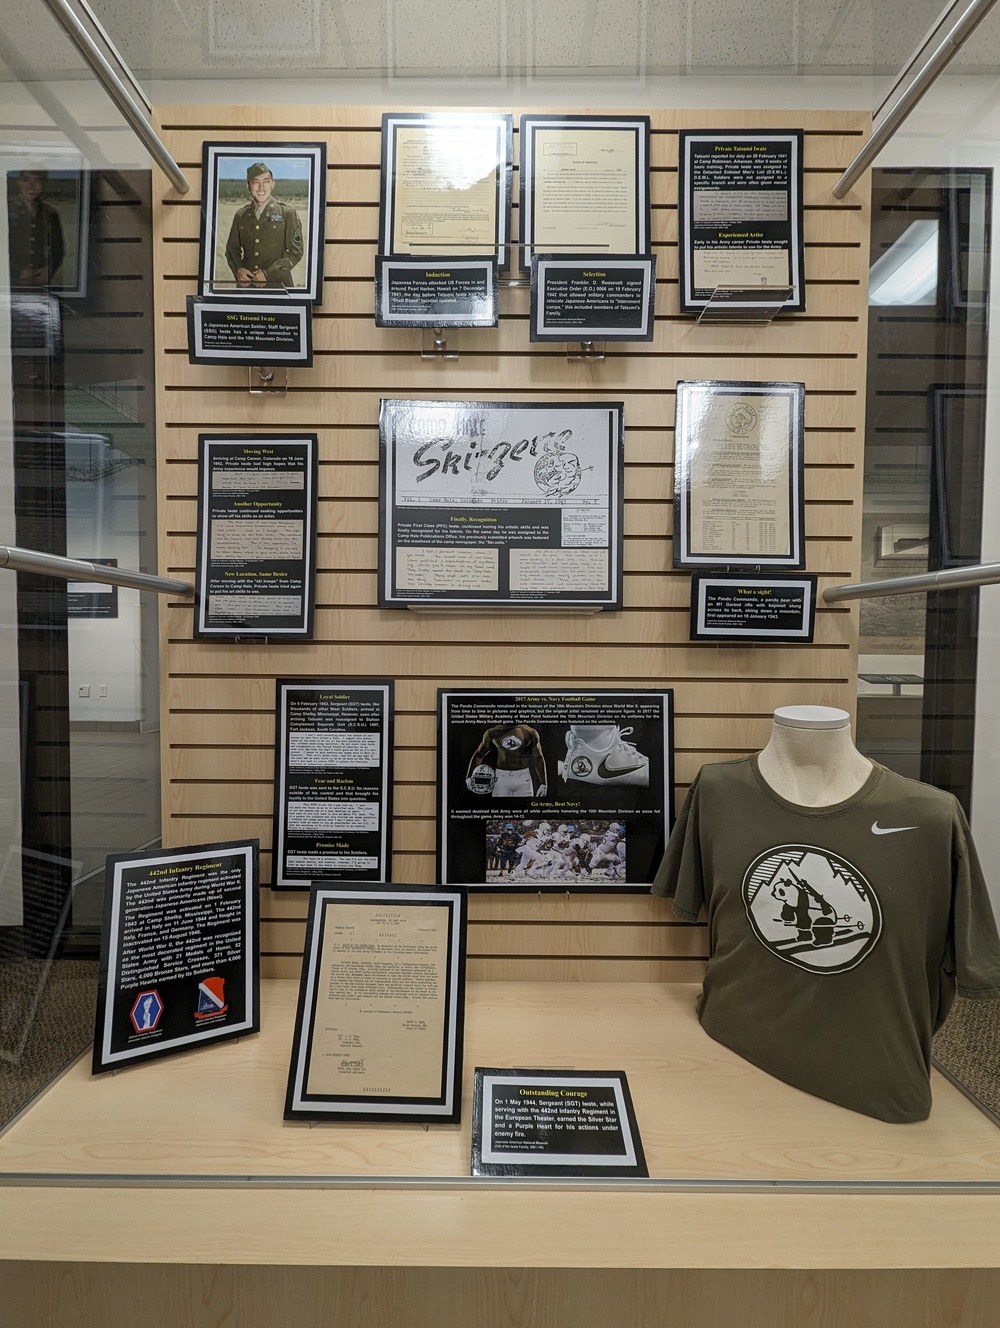 New museum exhibit at Fort Drum tells story of Soldier who drew iconic ‘Pando Commando’